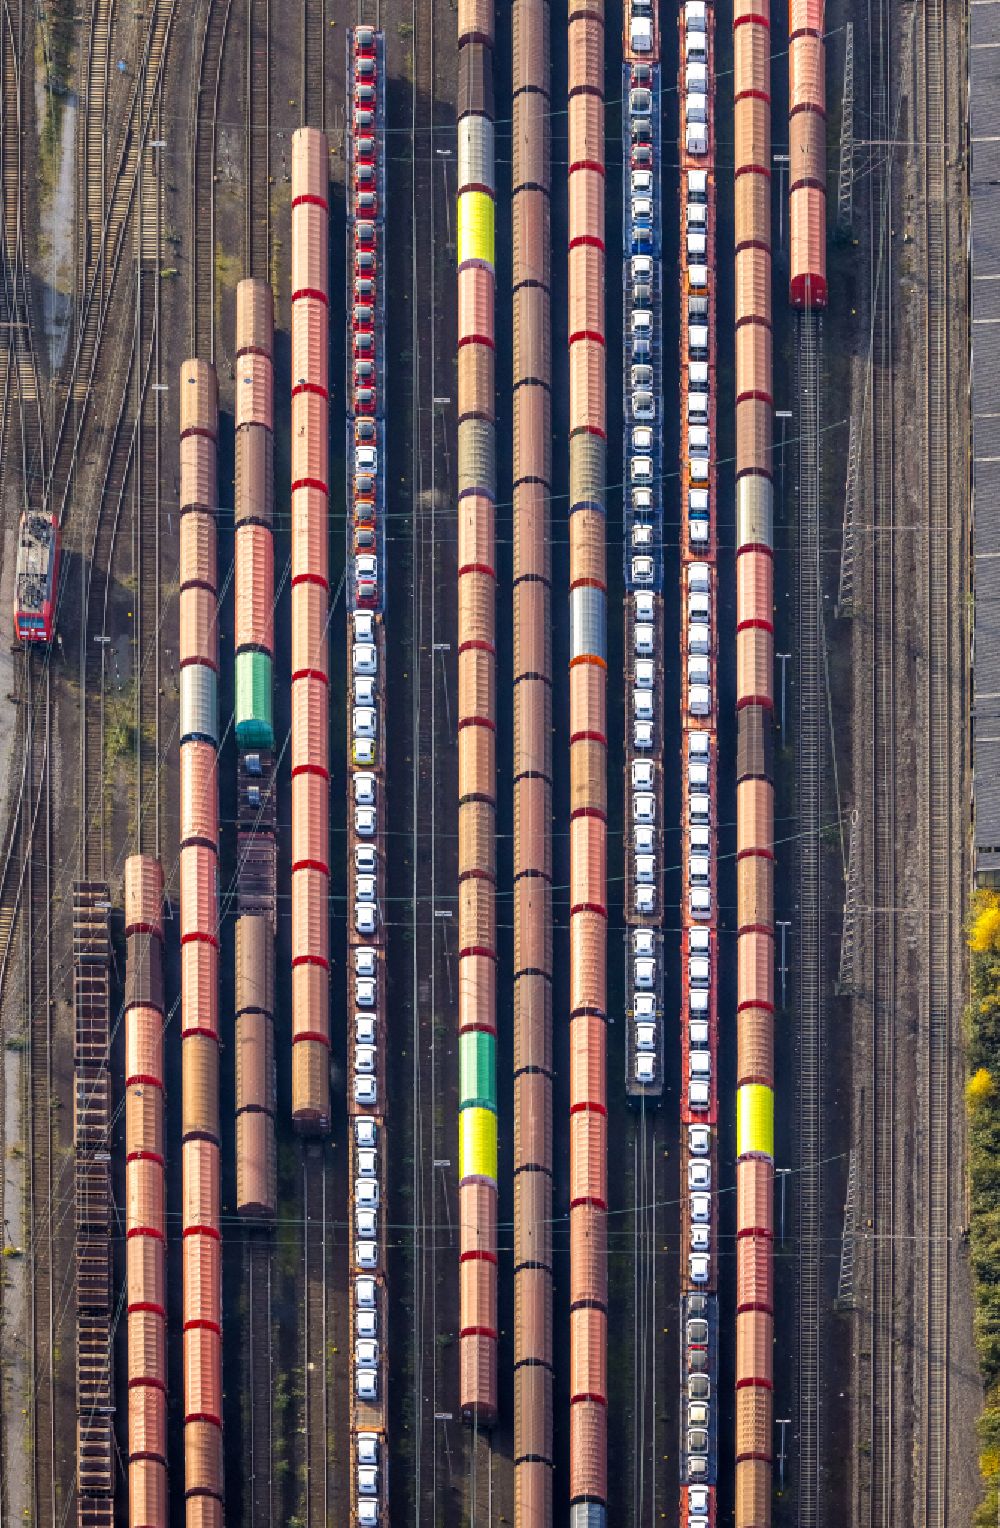 Herne from the bird's eye view: Marshalling yard and freight station on place Heinz-Ruehmann-Platz in Herne at Ruhrgebiet in the state North Rhine-Westphalia, Germany